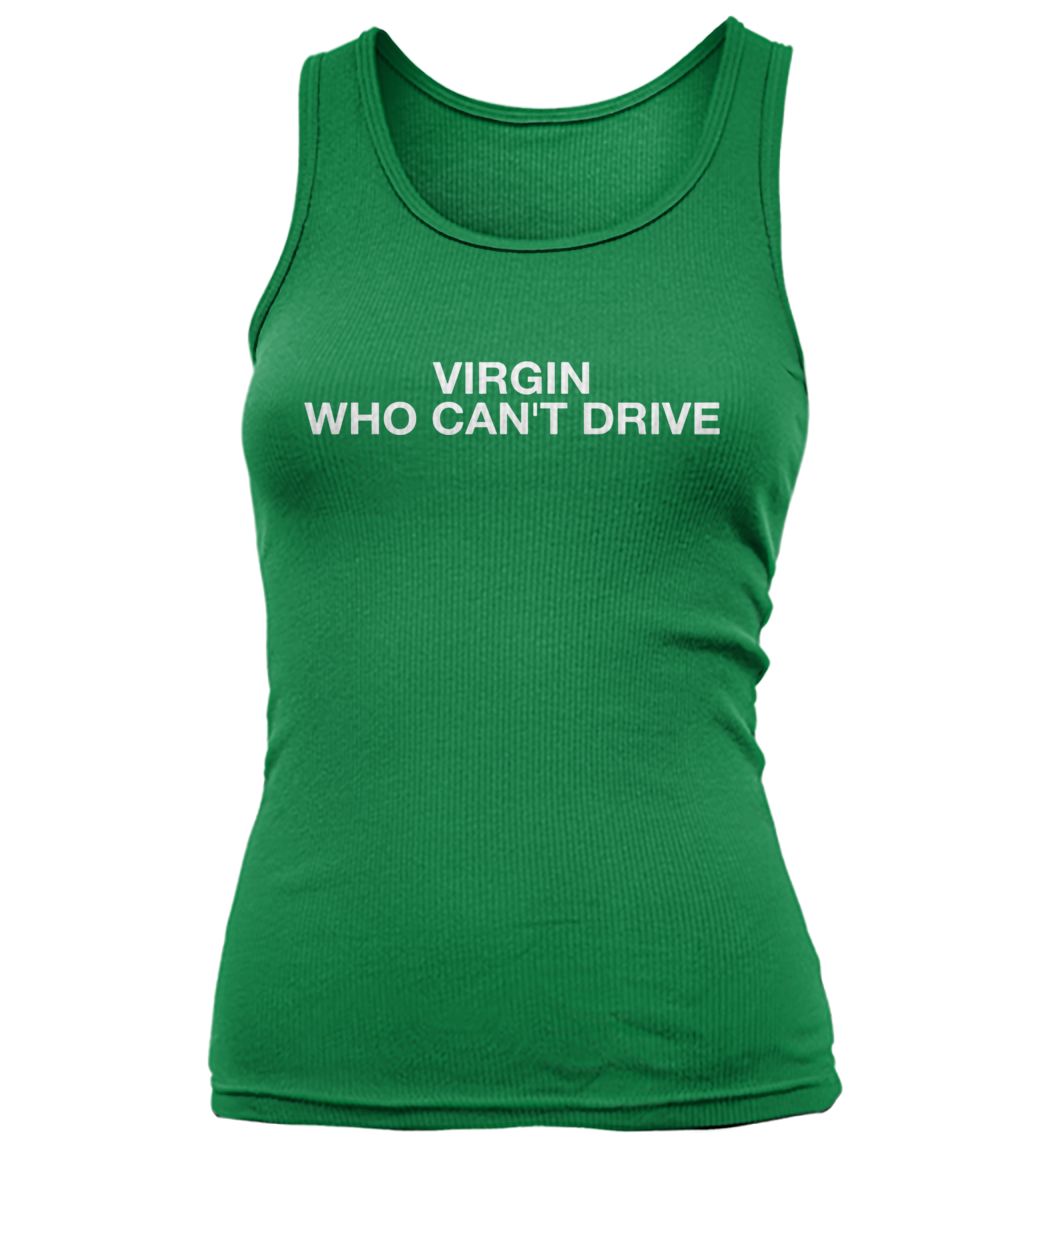 Slayyyter virgin who can't drive women's tank top